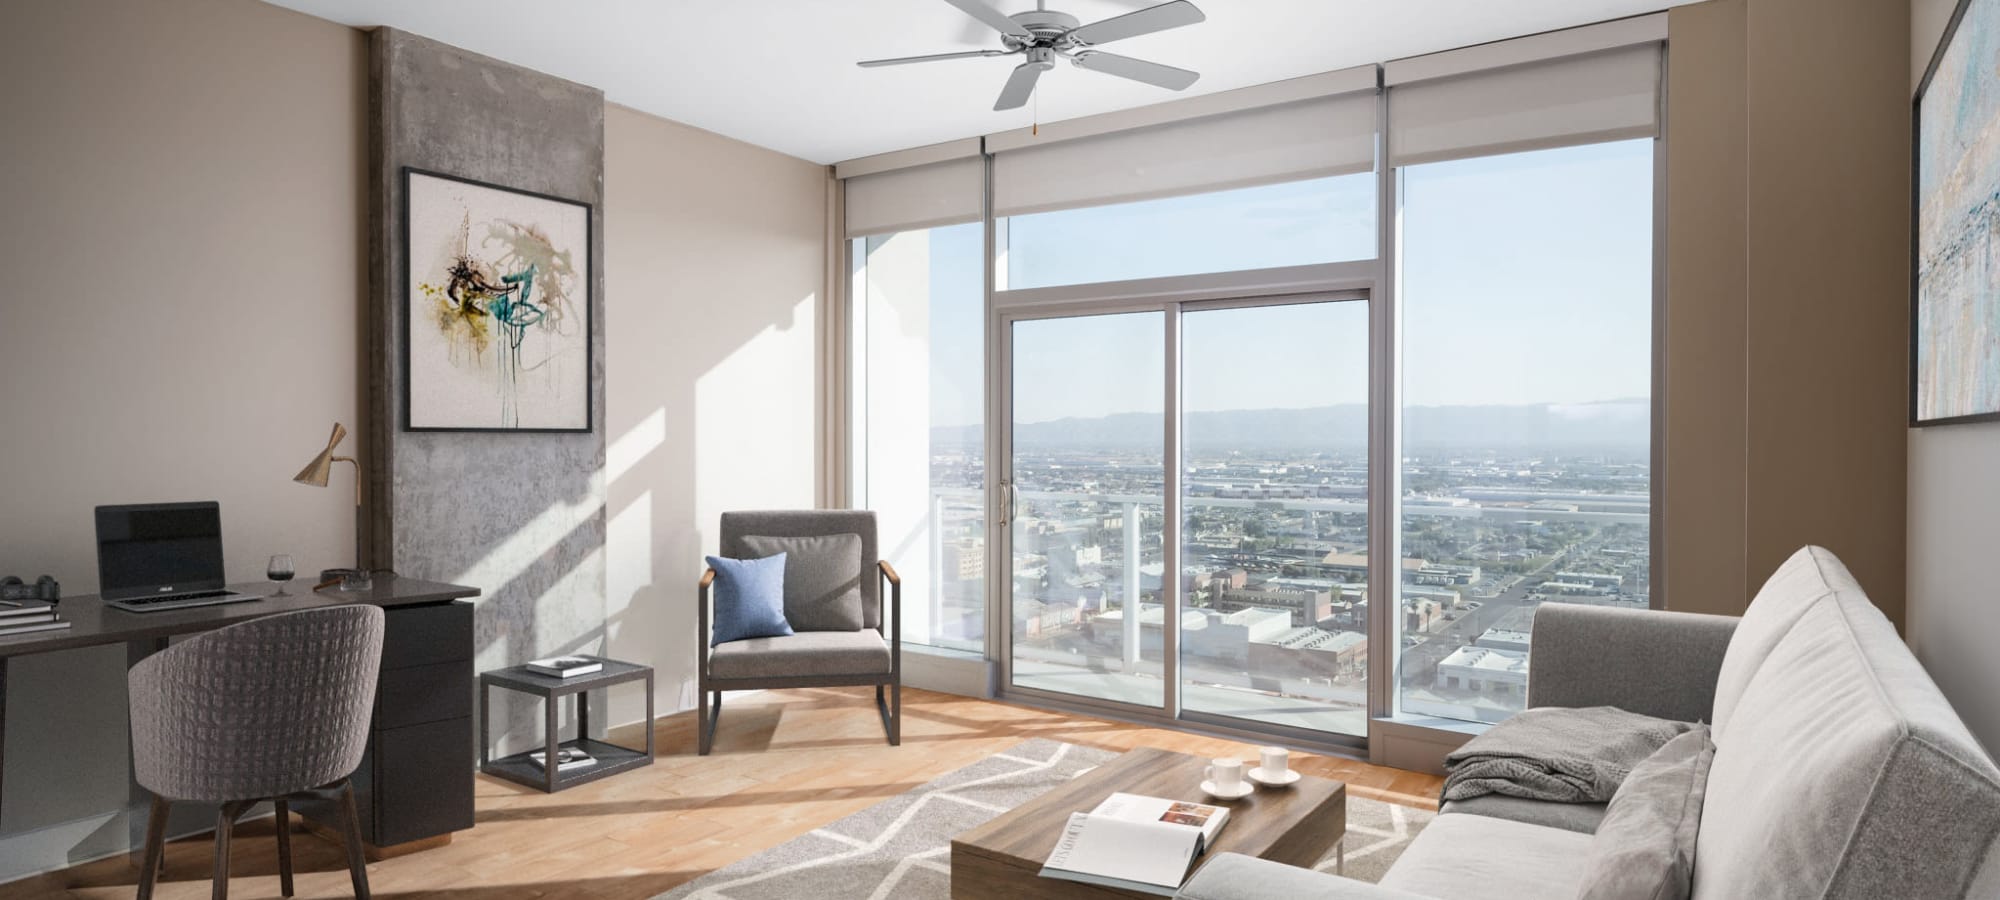 Living room at our high-rise apartments at CityScape Residences in Phoenix, AZ